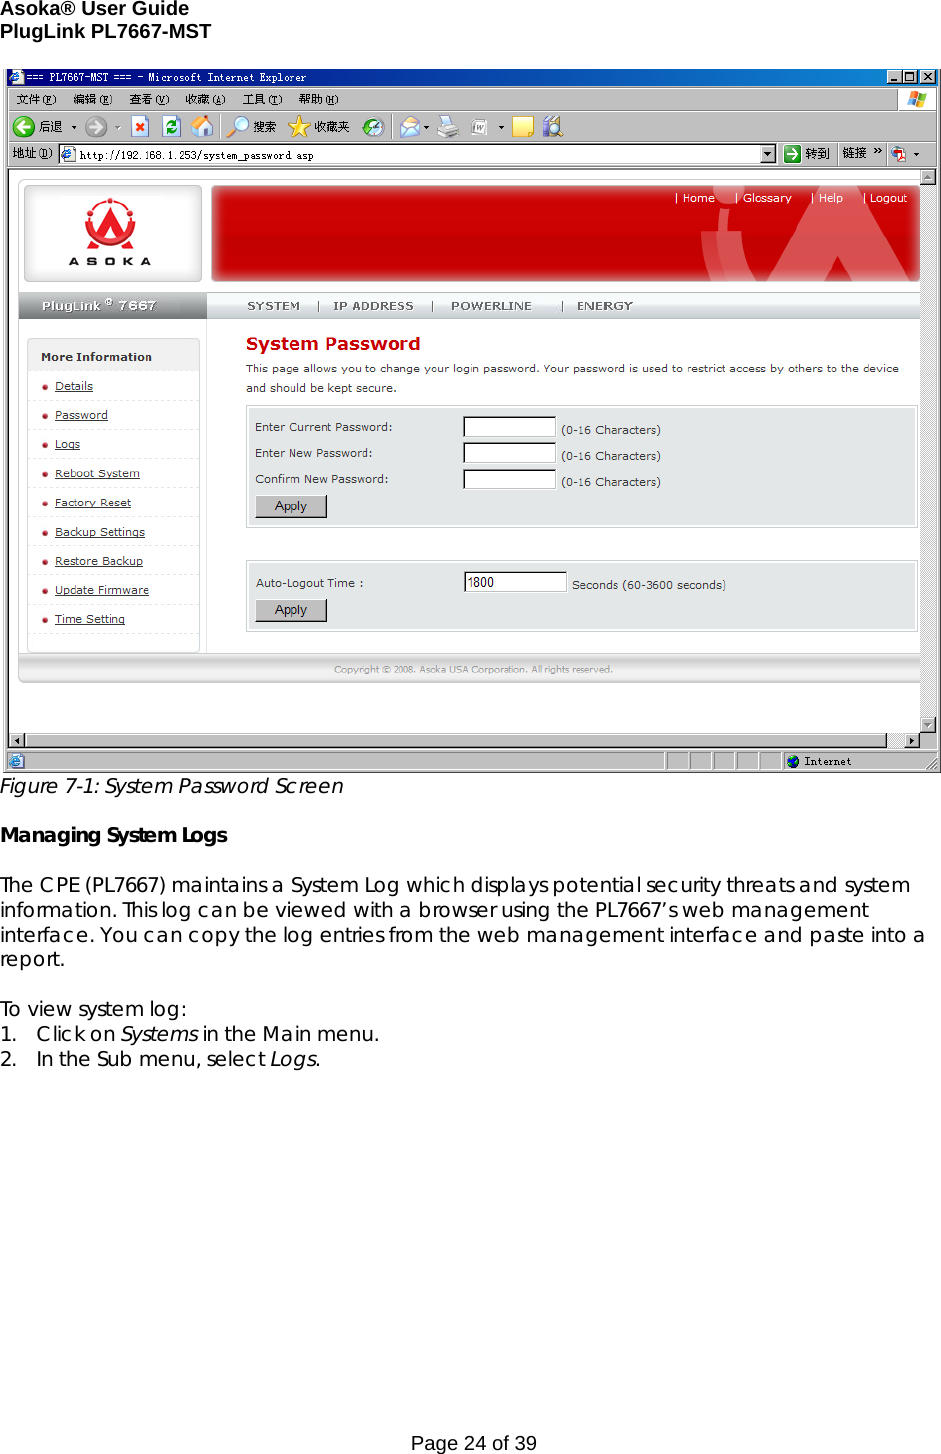 Asoka® User Guide  PlugLink PL7667-MST Page 24 of 39  Figure 7-1: System Password Screen  Managing System Logs  The CPE (PL7667) maintains a System Log which displays potential security threats and system information. This log can be viewed with a browser using the PL7667’s web management interface. You can copy the log entries from the web management interface and paste into a report.  To view system log: 1. Click on Systems in the Main menu. 2. In the Sub menu, select Logs.   